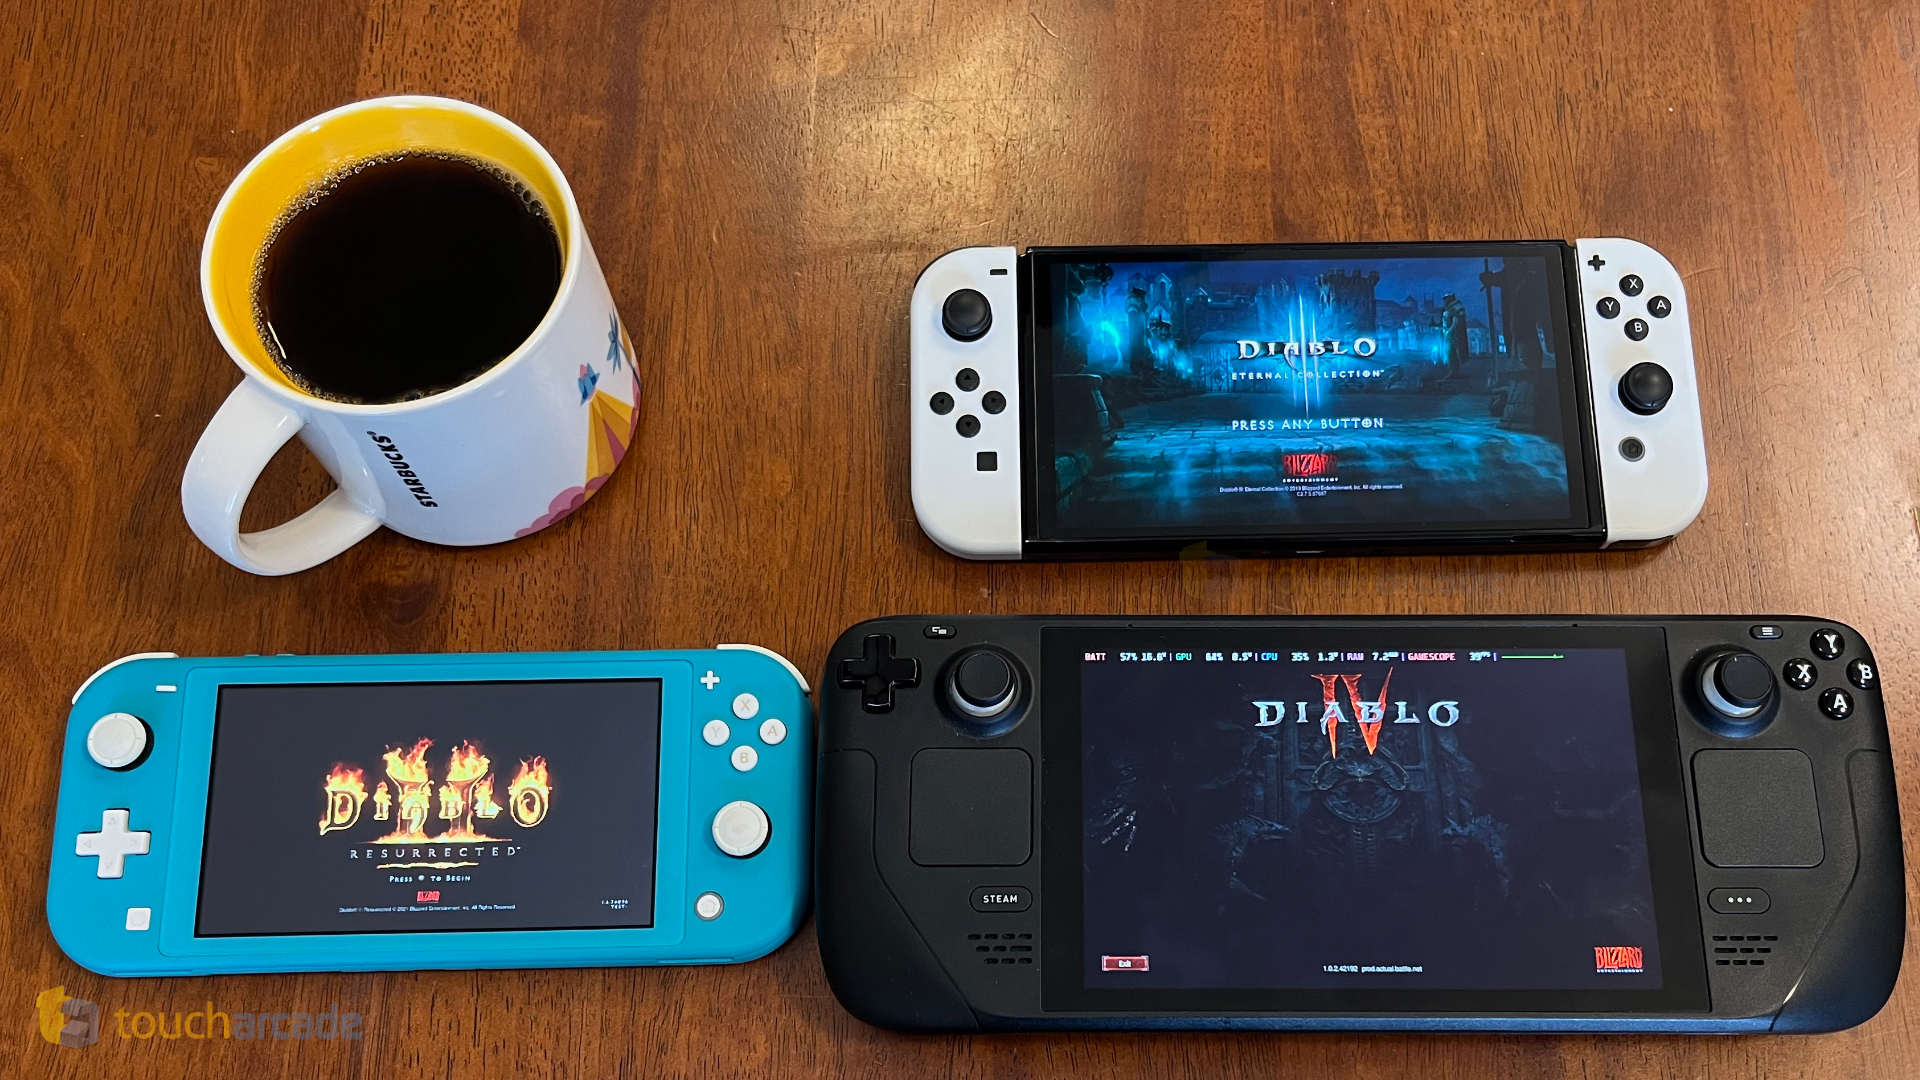 How to Install 'Diablo IV' on Your Steam Deck